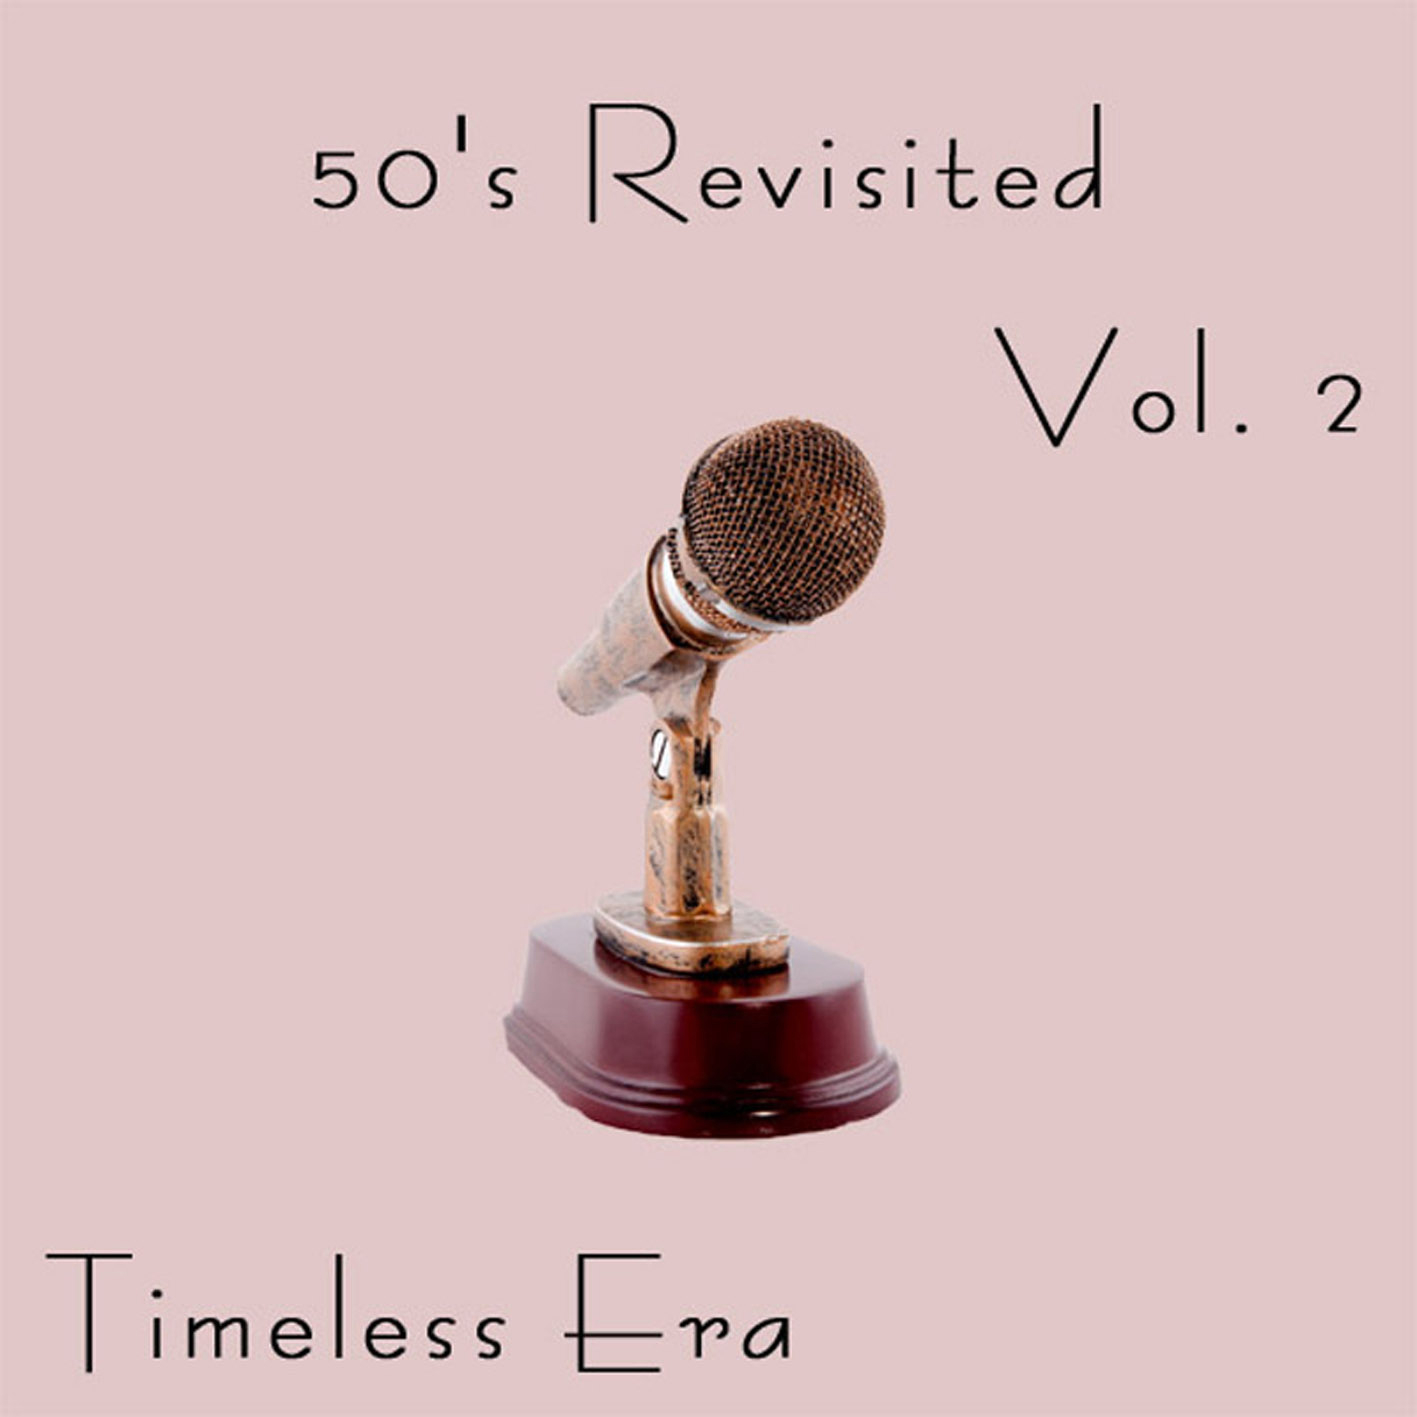 Timeless Era: 50's Revisited Vol.2